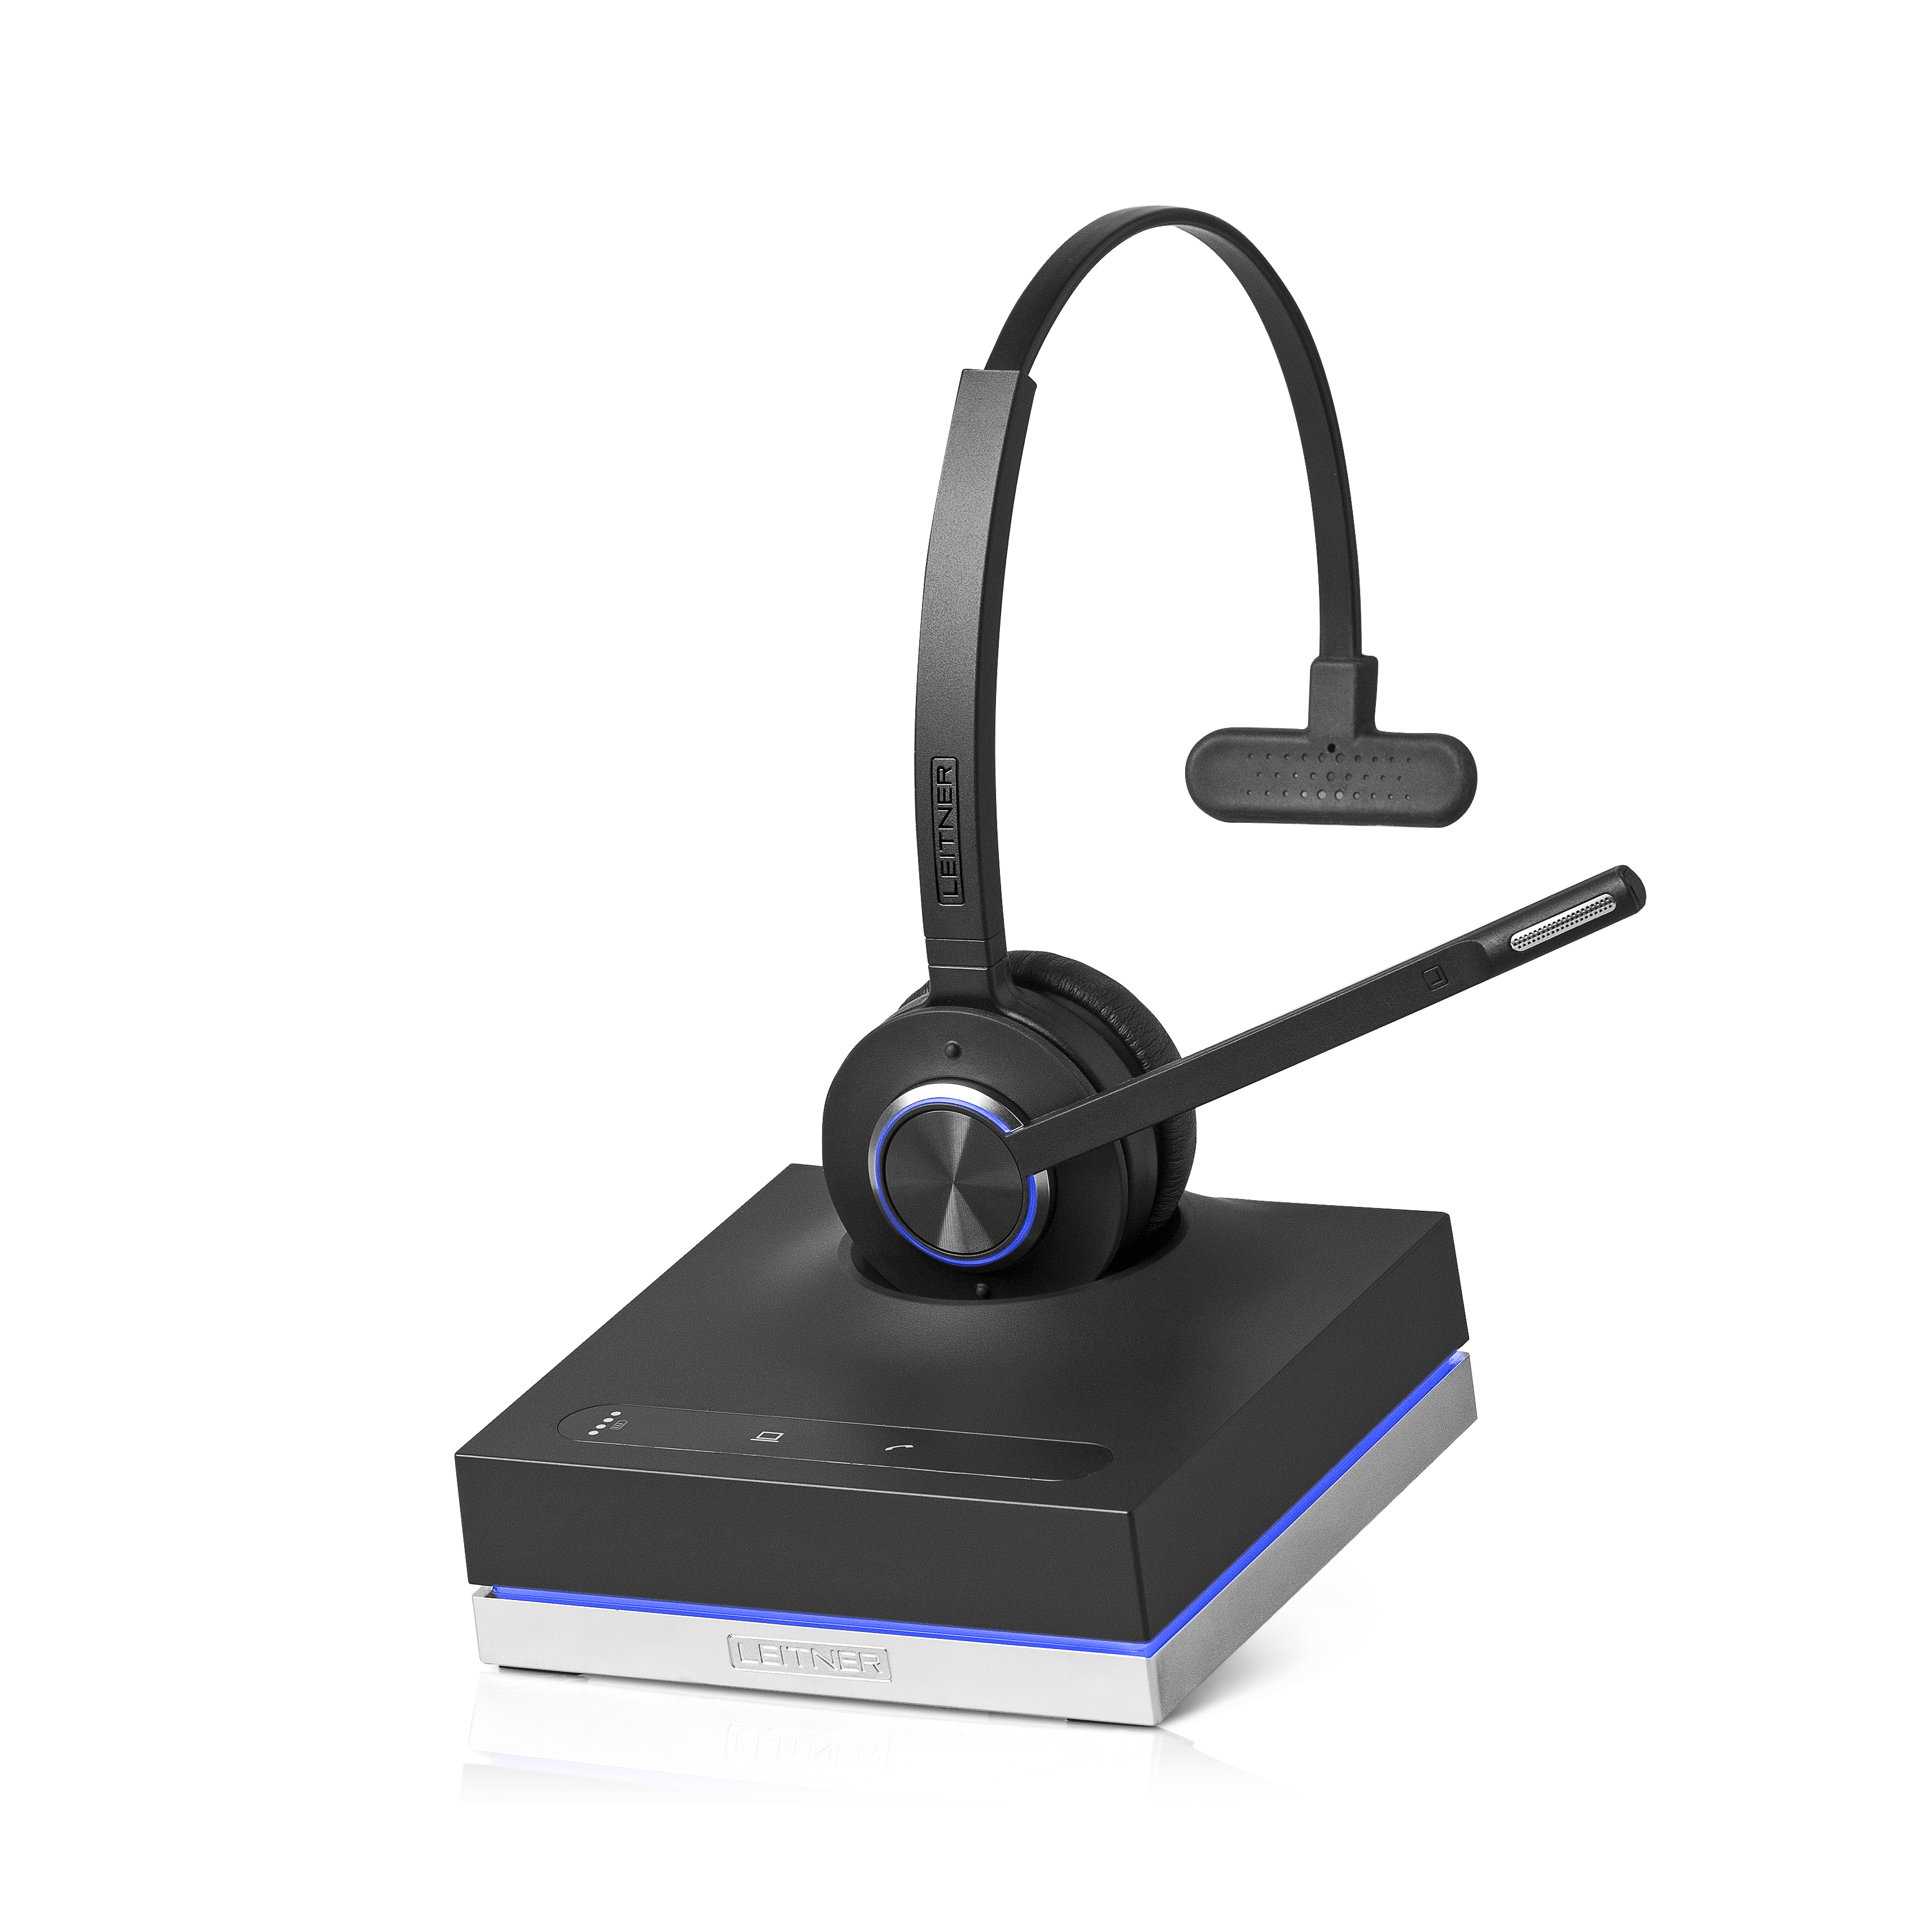 Leitner LH570 wireless headset and base